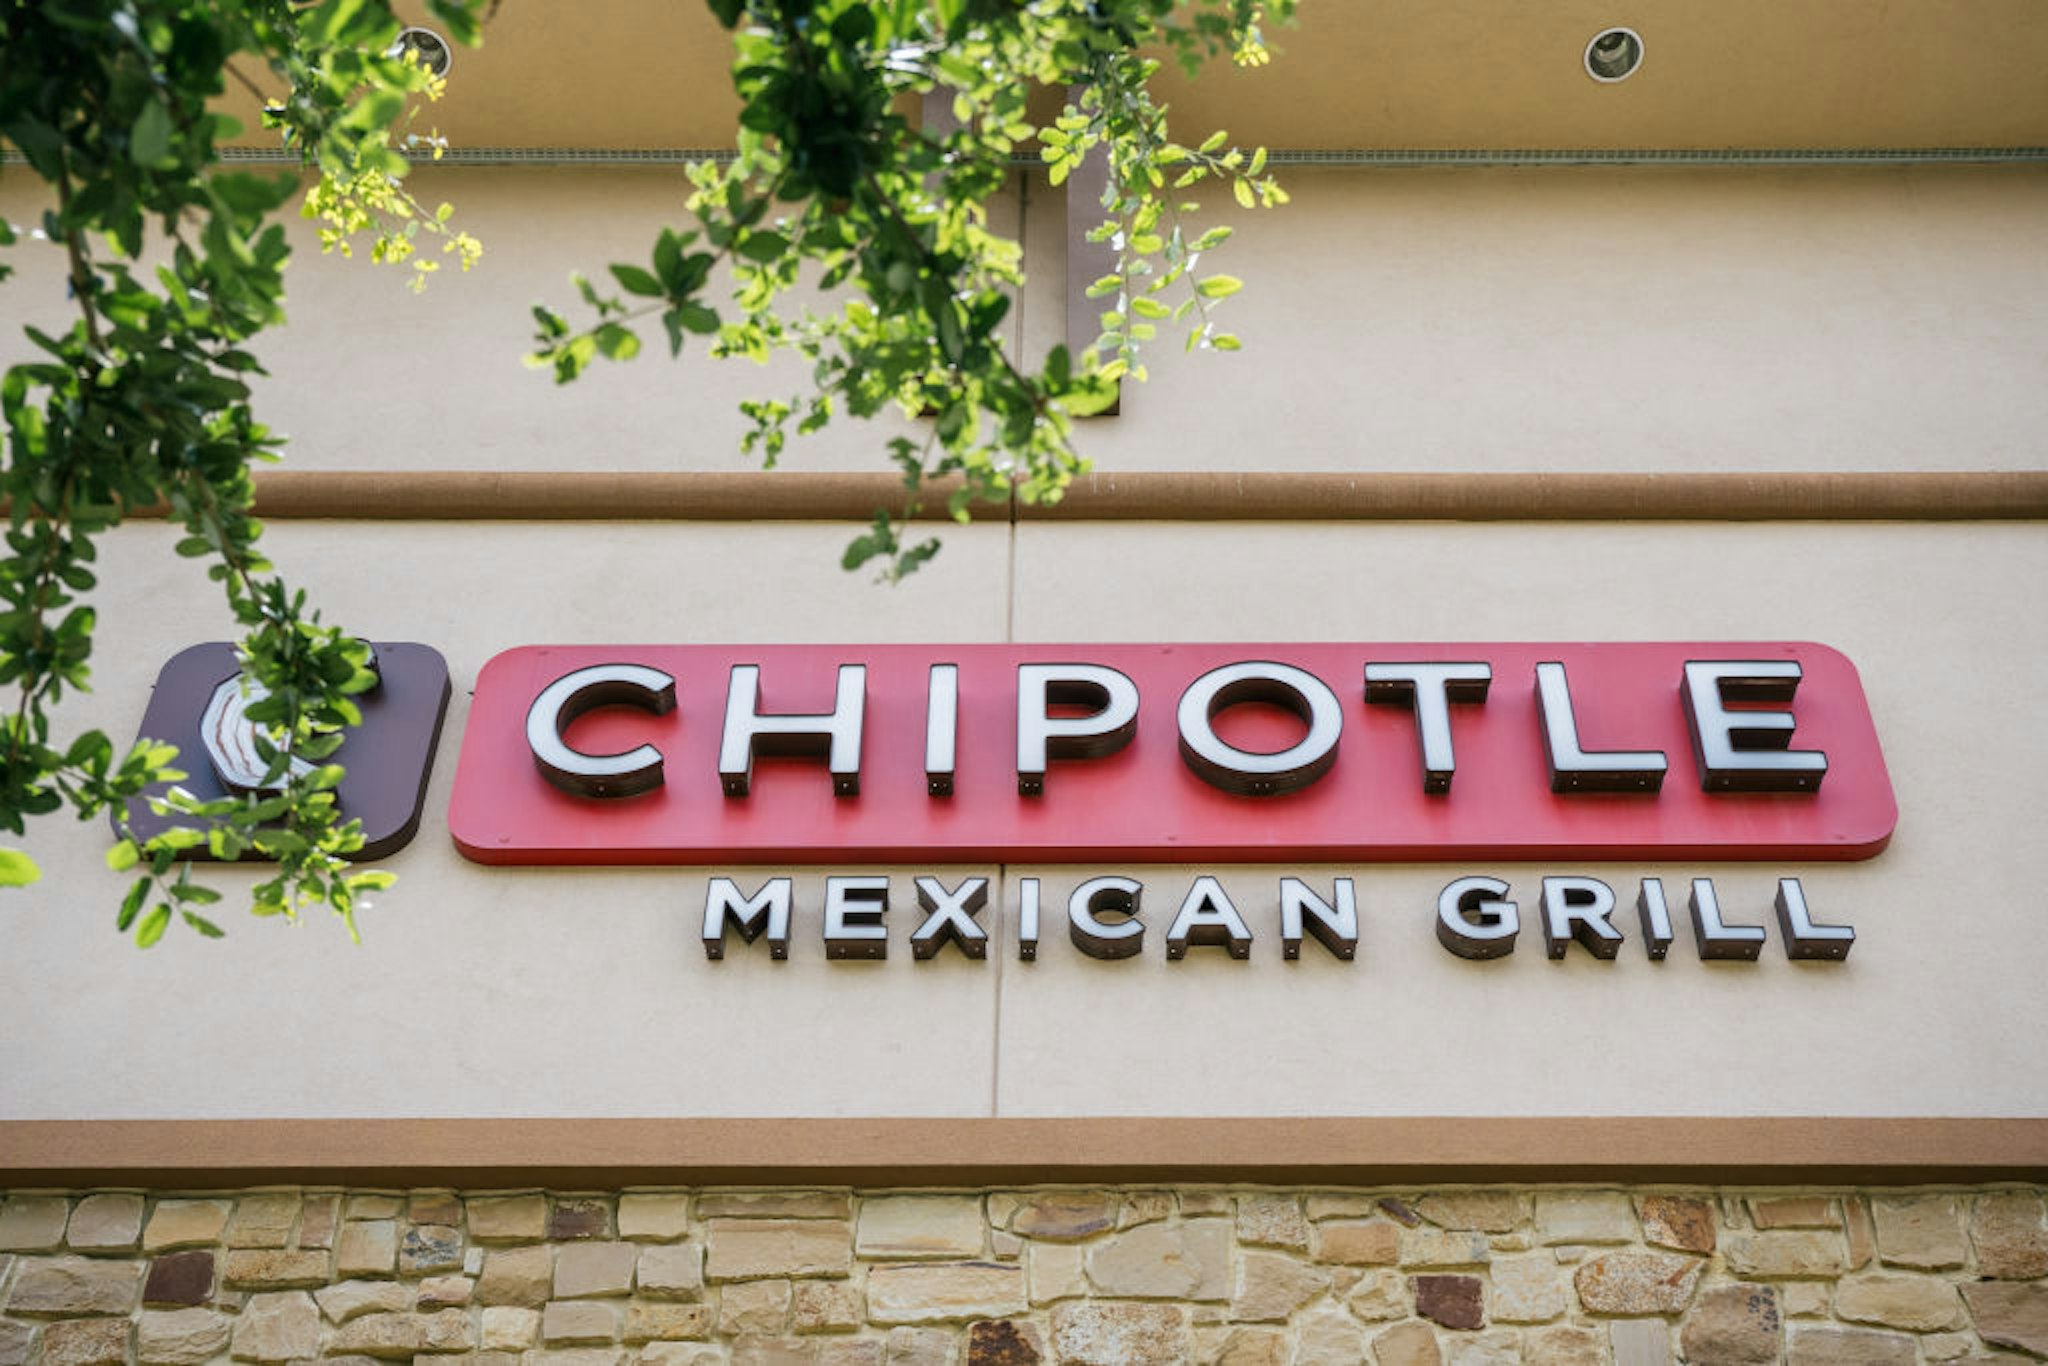 A Chipotle Mexican Grill sign is shown on June 09, 2021 in Houston, Texas.